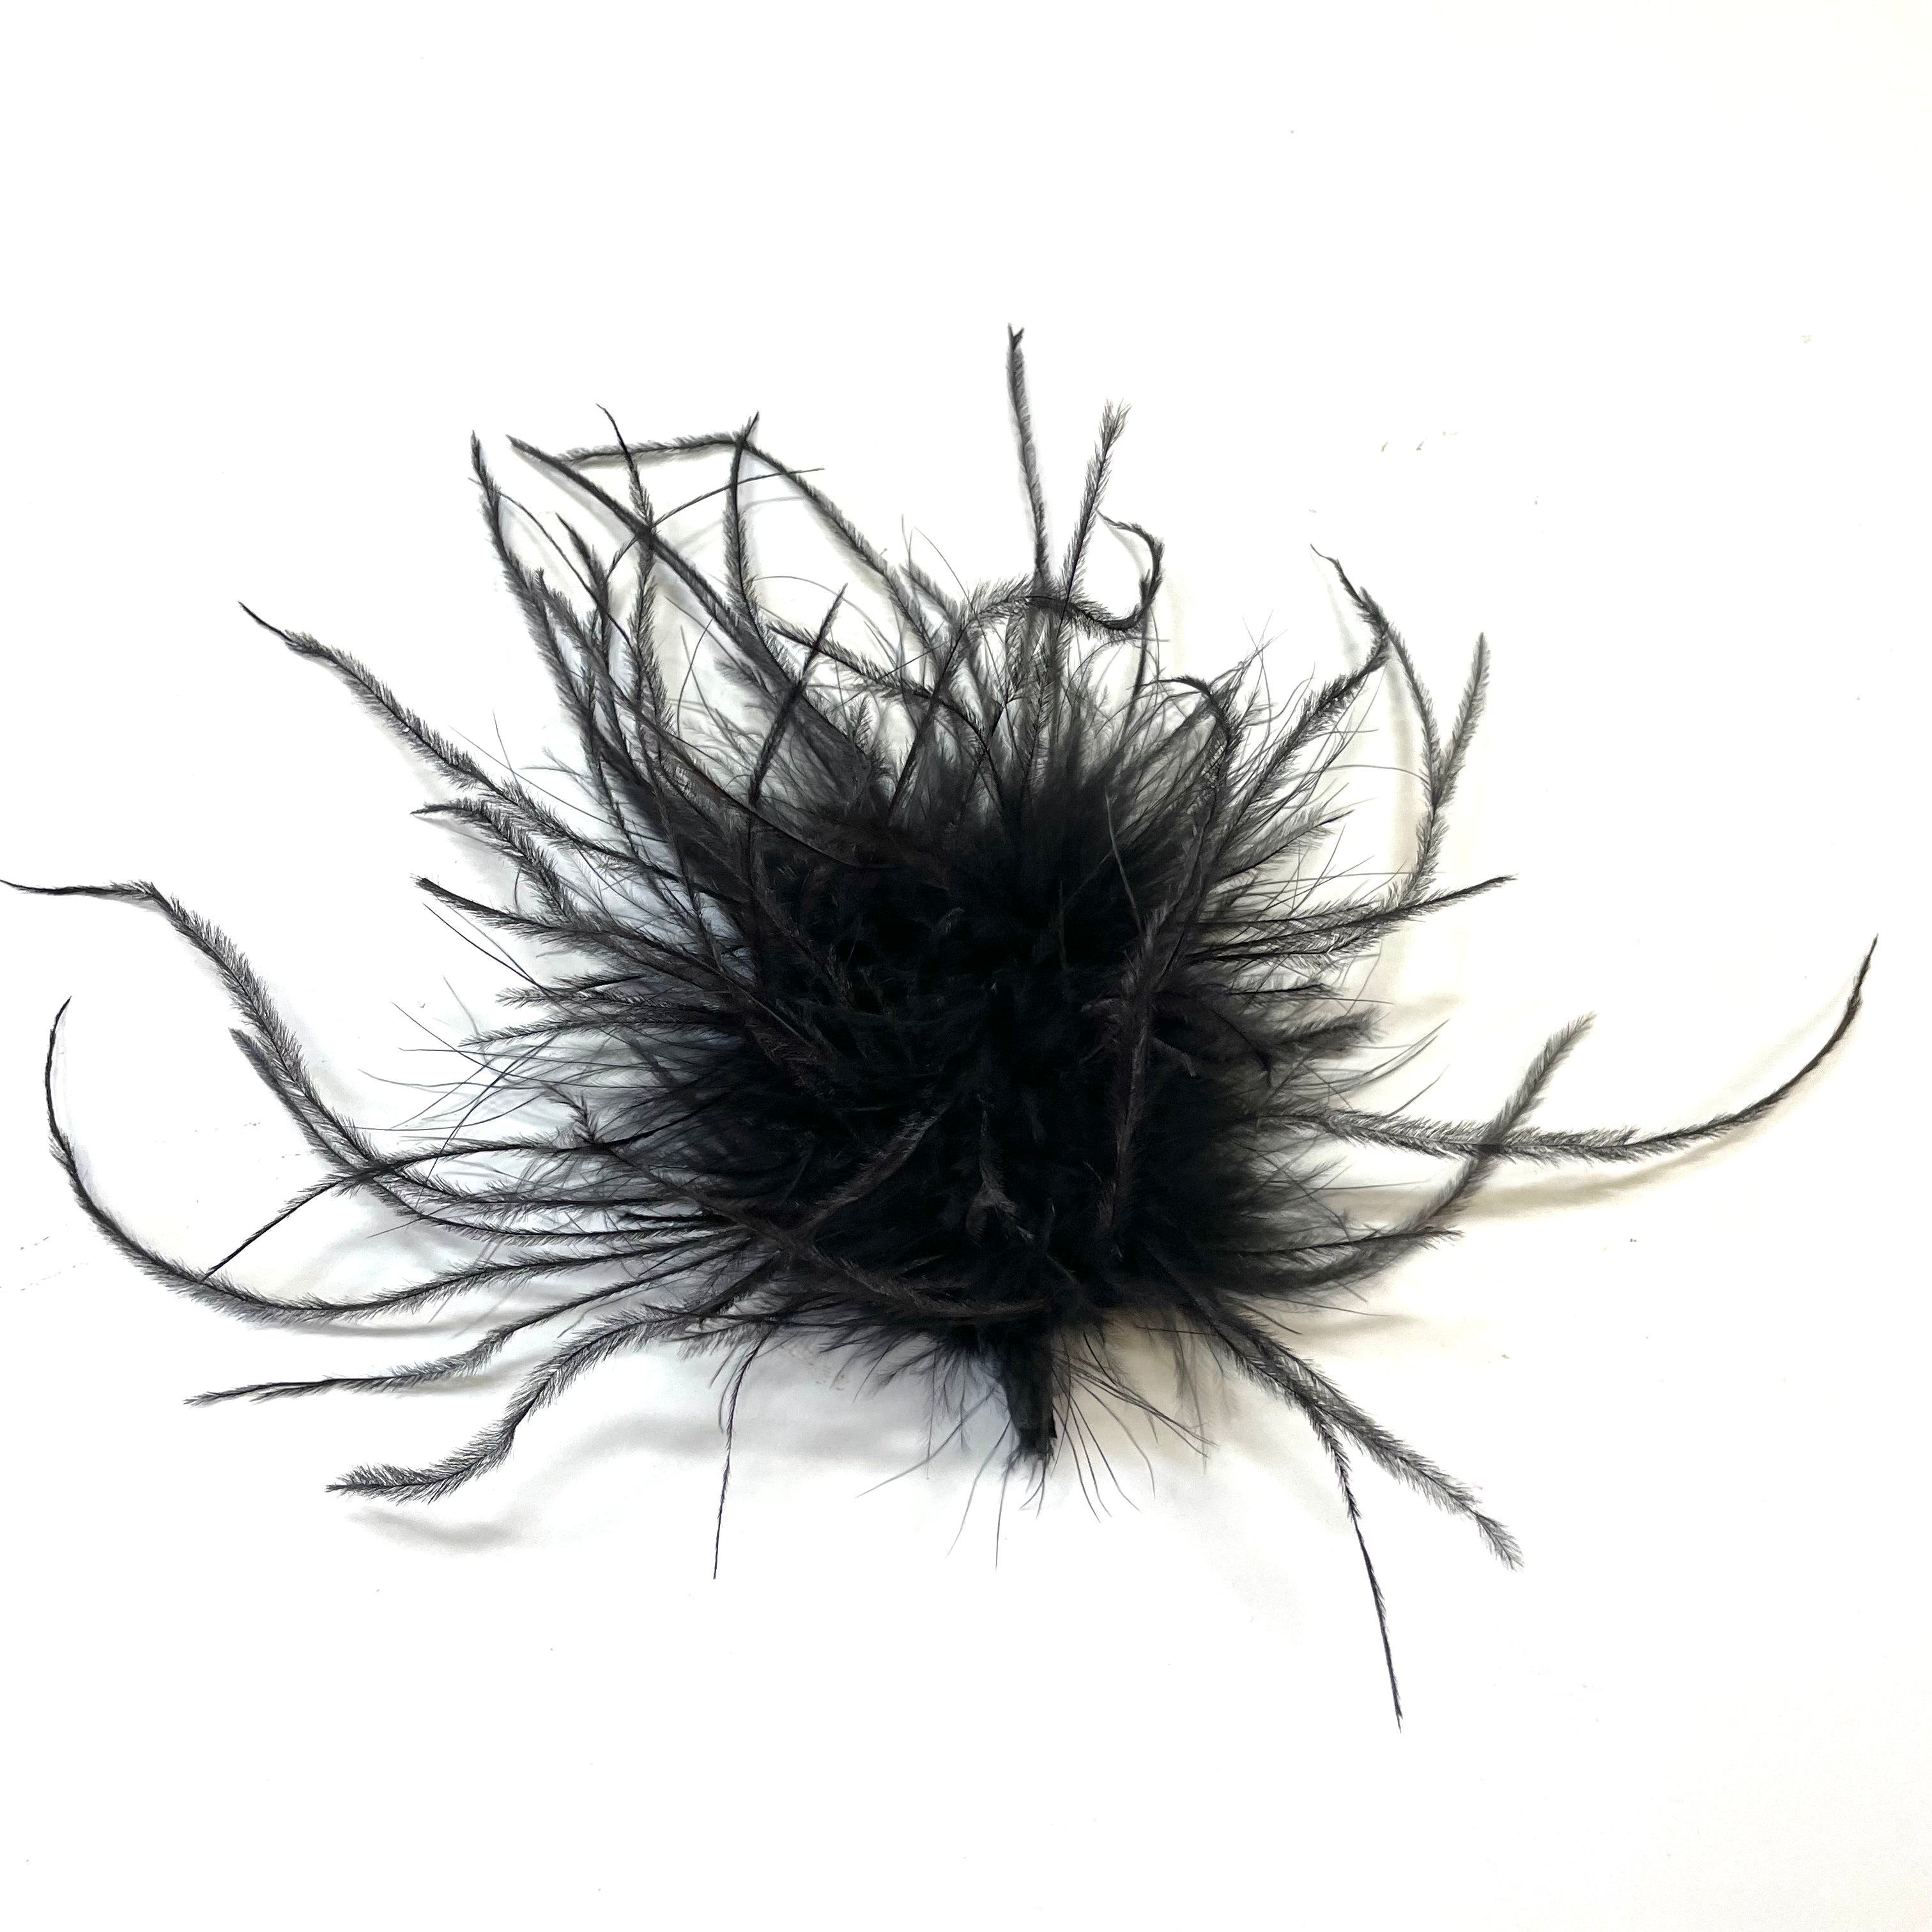 Marabou Feathers 4-6 6g White with Royal Blue Tip 